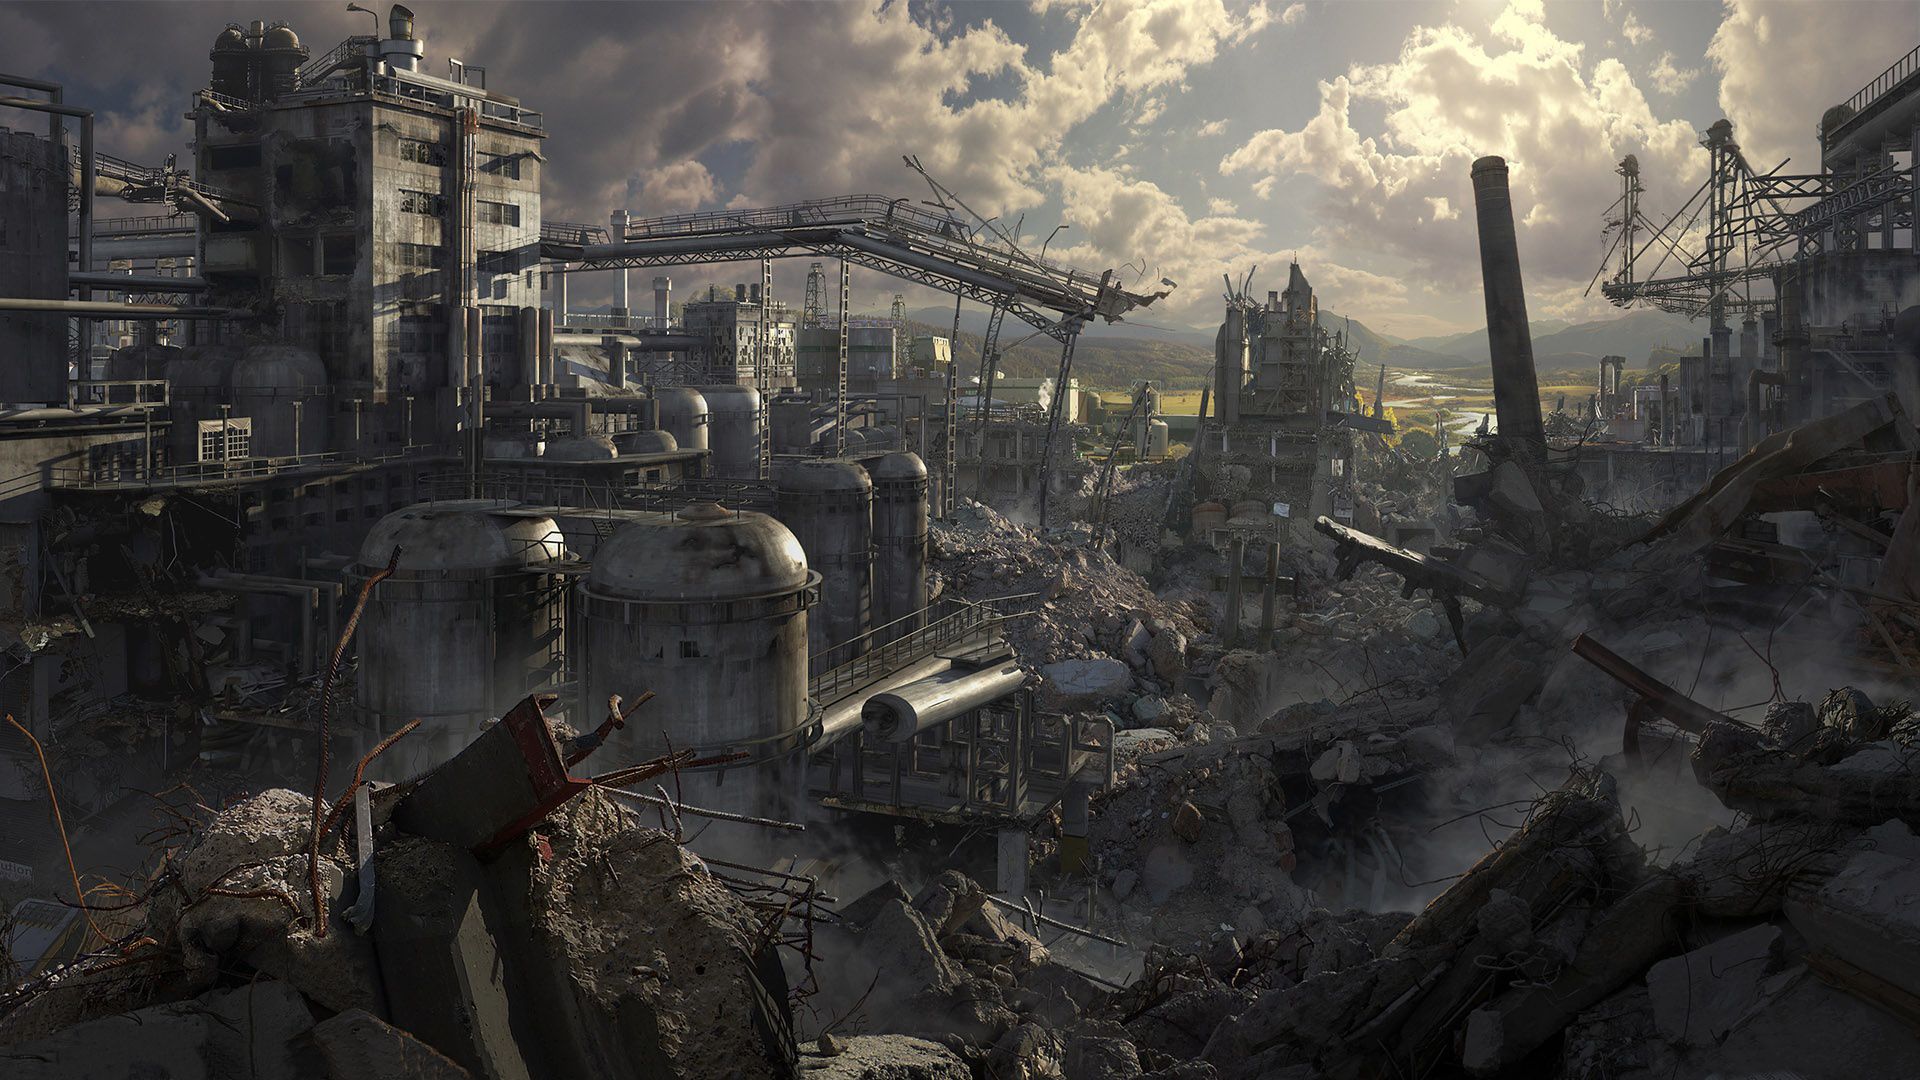 City In Ruins HD Wallpaper 1920x1080. Post apocalyptic city, Post apocalypse, Post apocalyptic